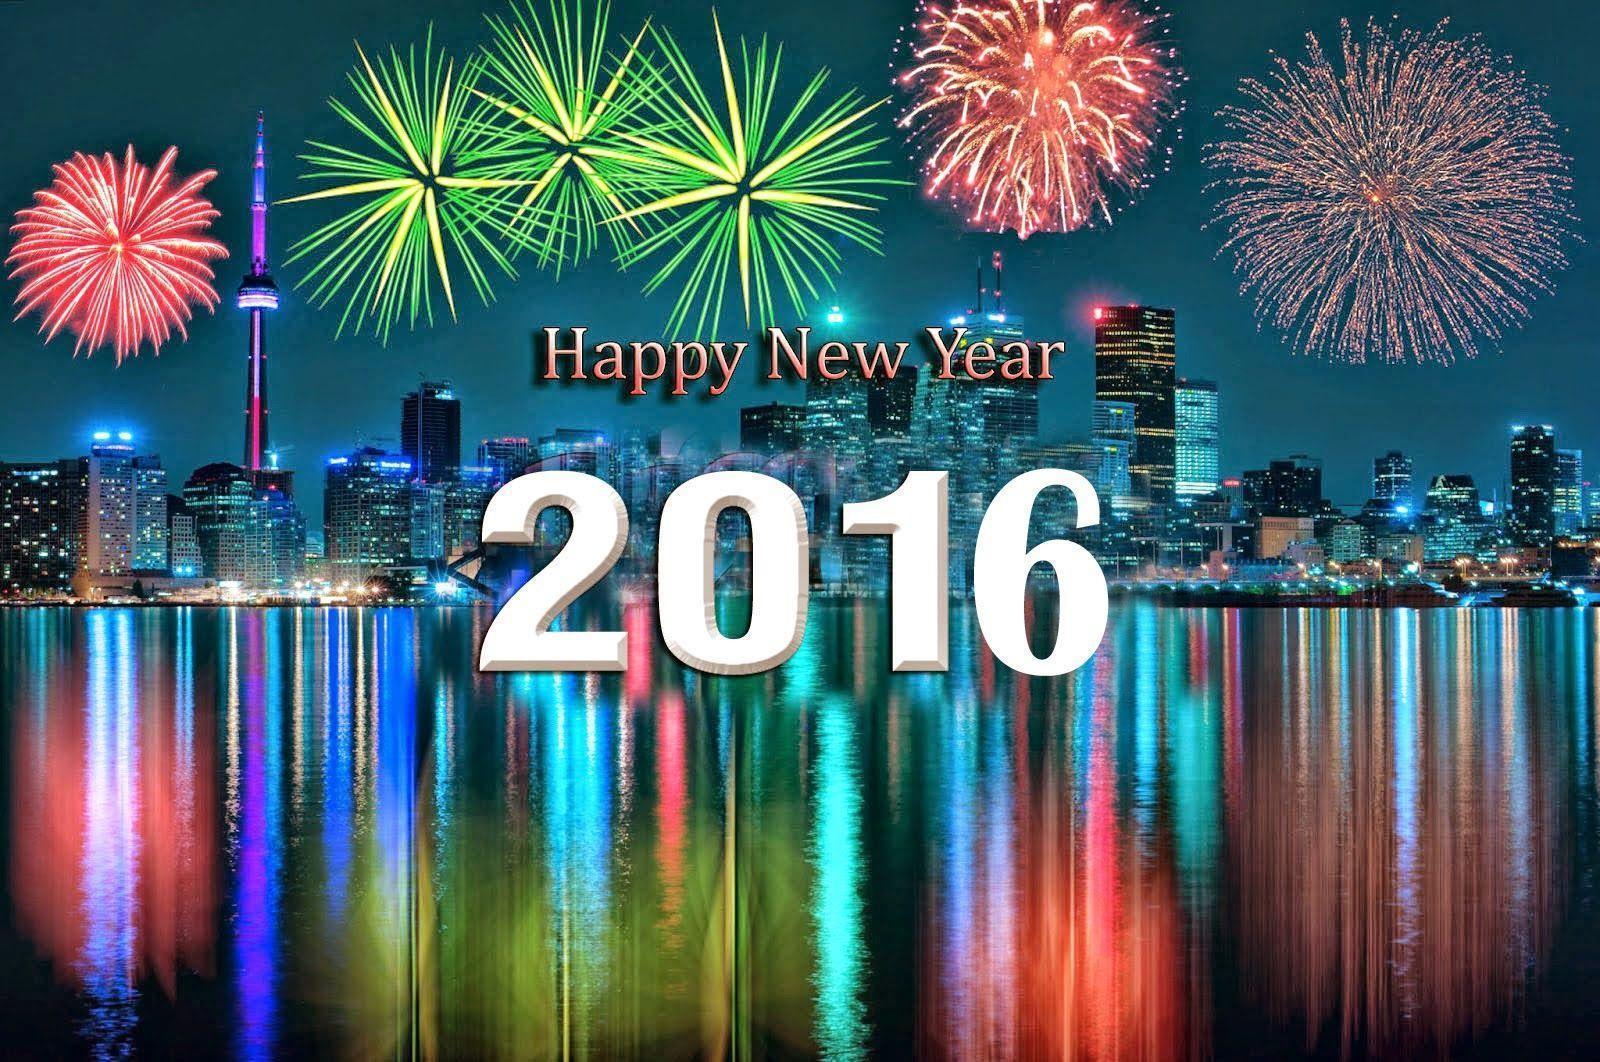 Happy New Year 2016 Wishes, Image, Quotes, Wallpaper, Poems, SMS